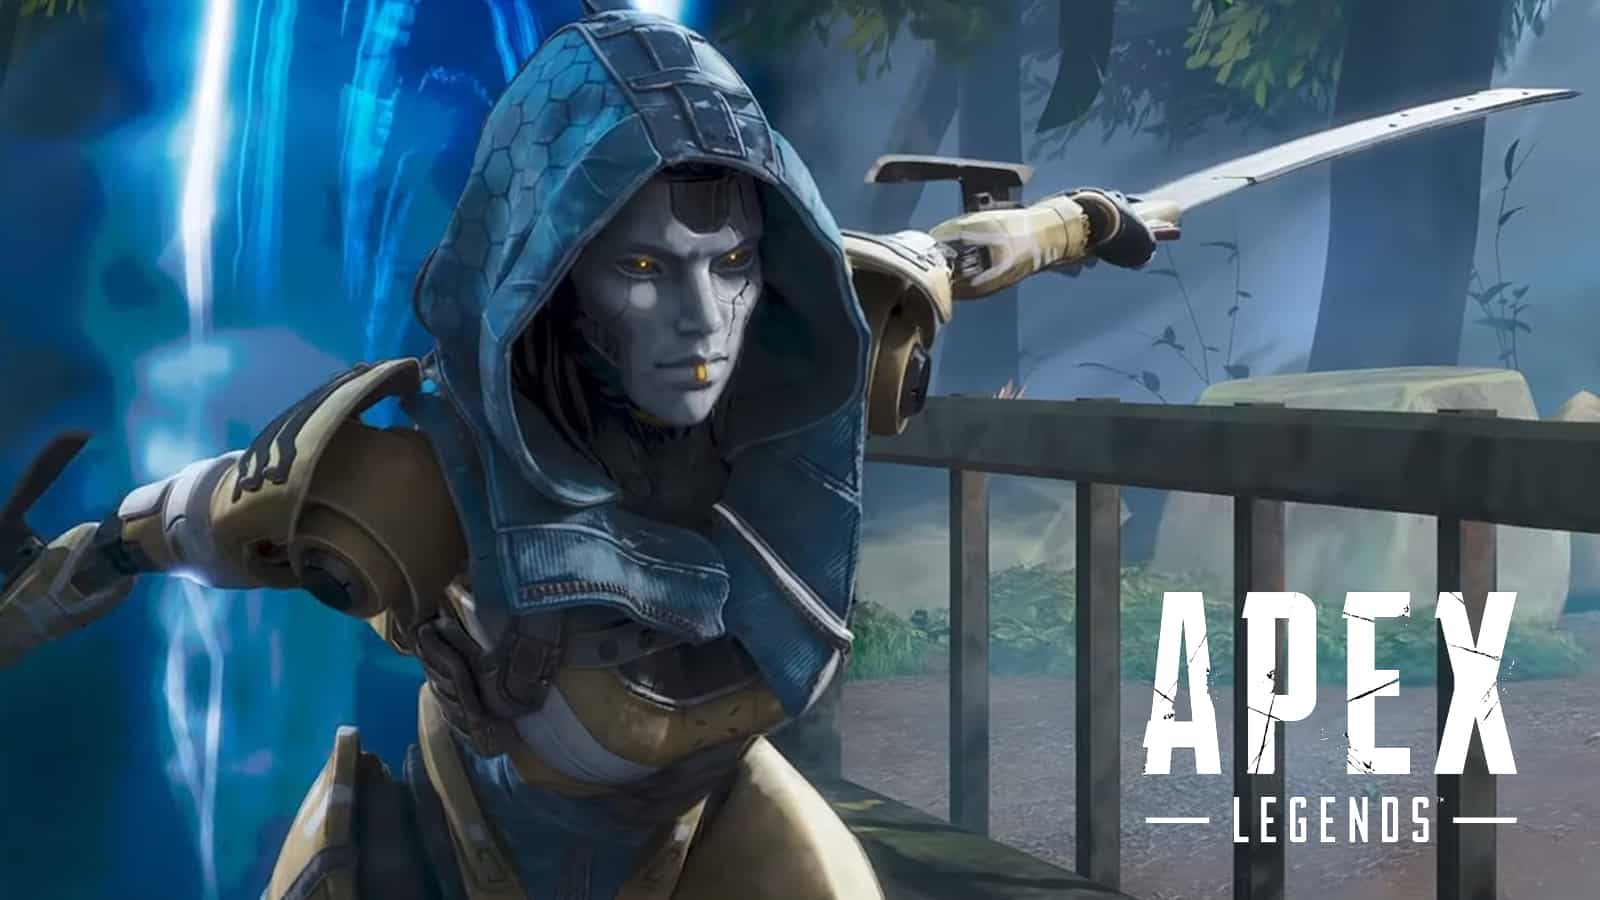 An image of Ash from Apex Legends Season 11